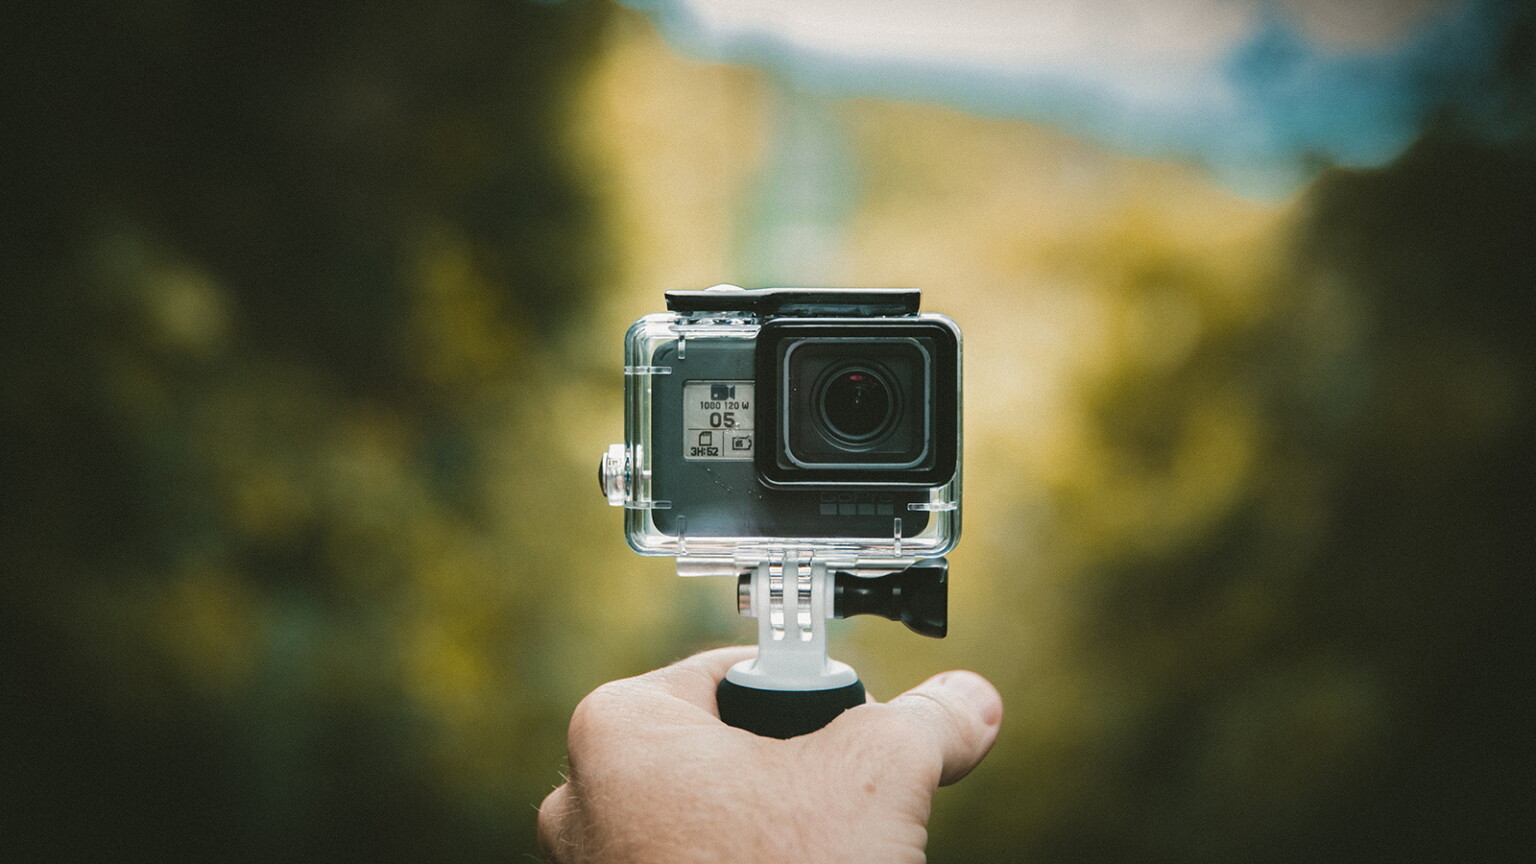 Best GoPro Action Cameras HighDefinition Video and Photo Shooting!